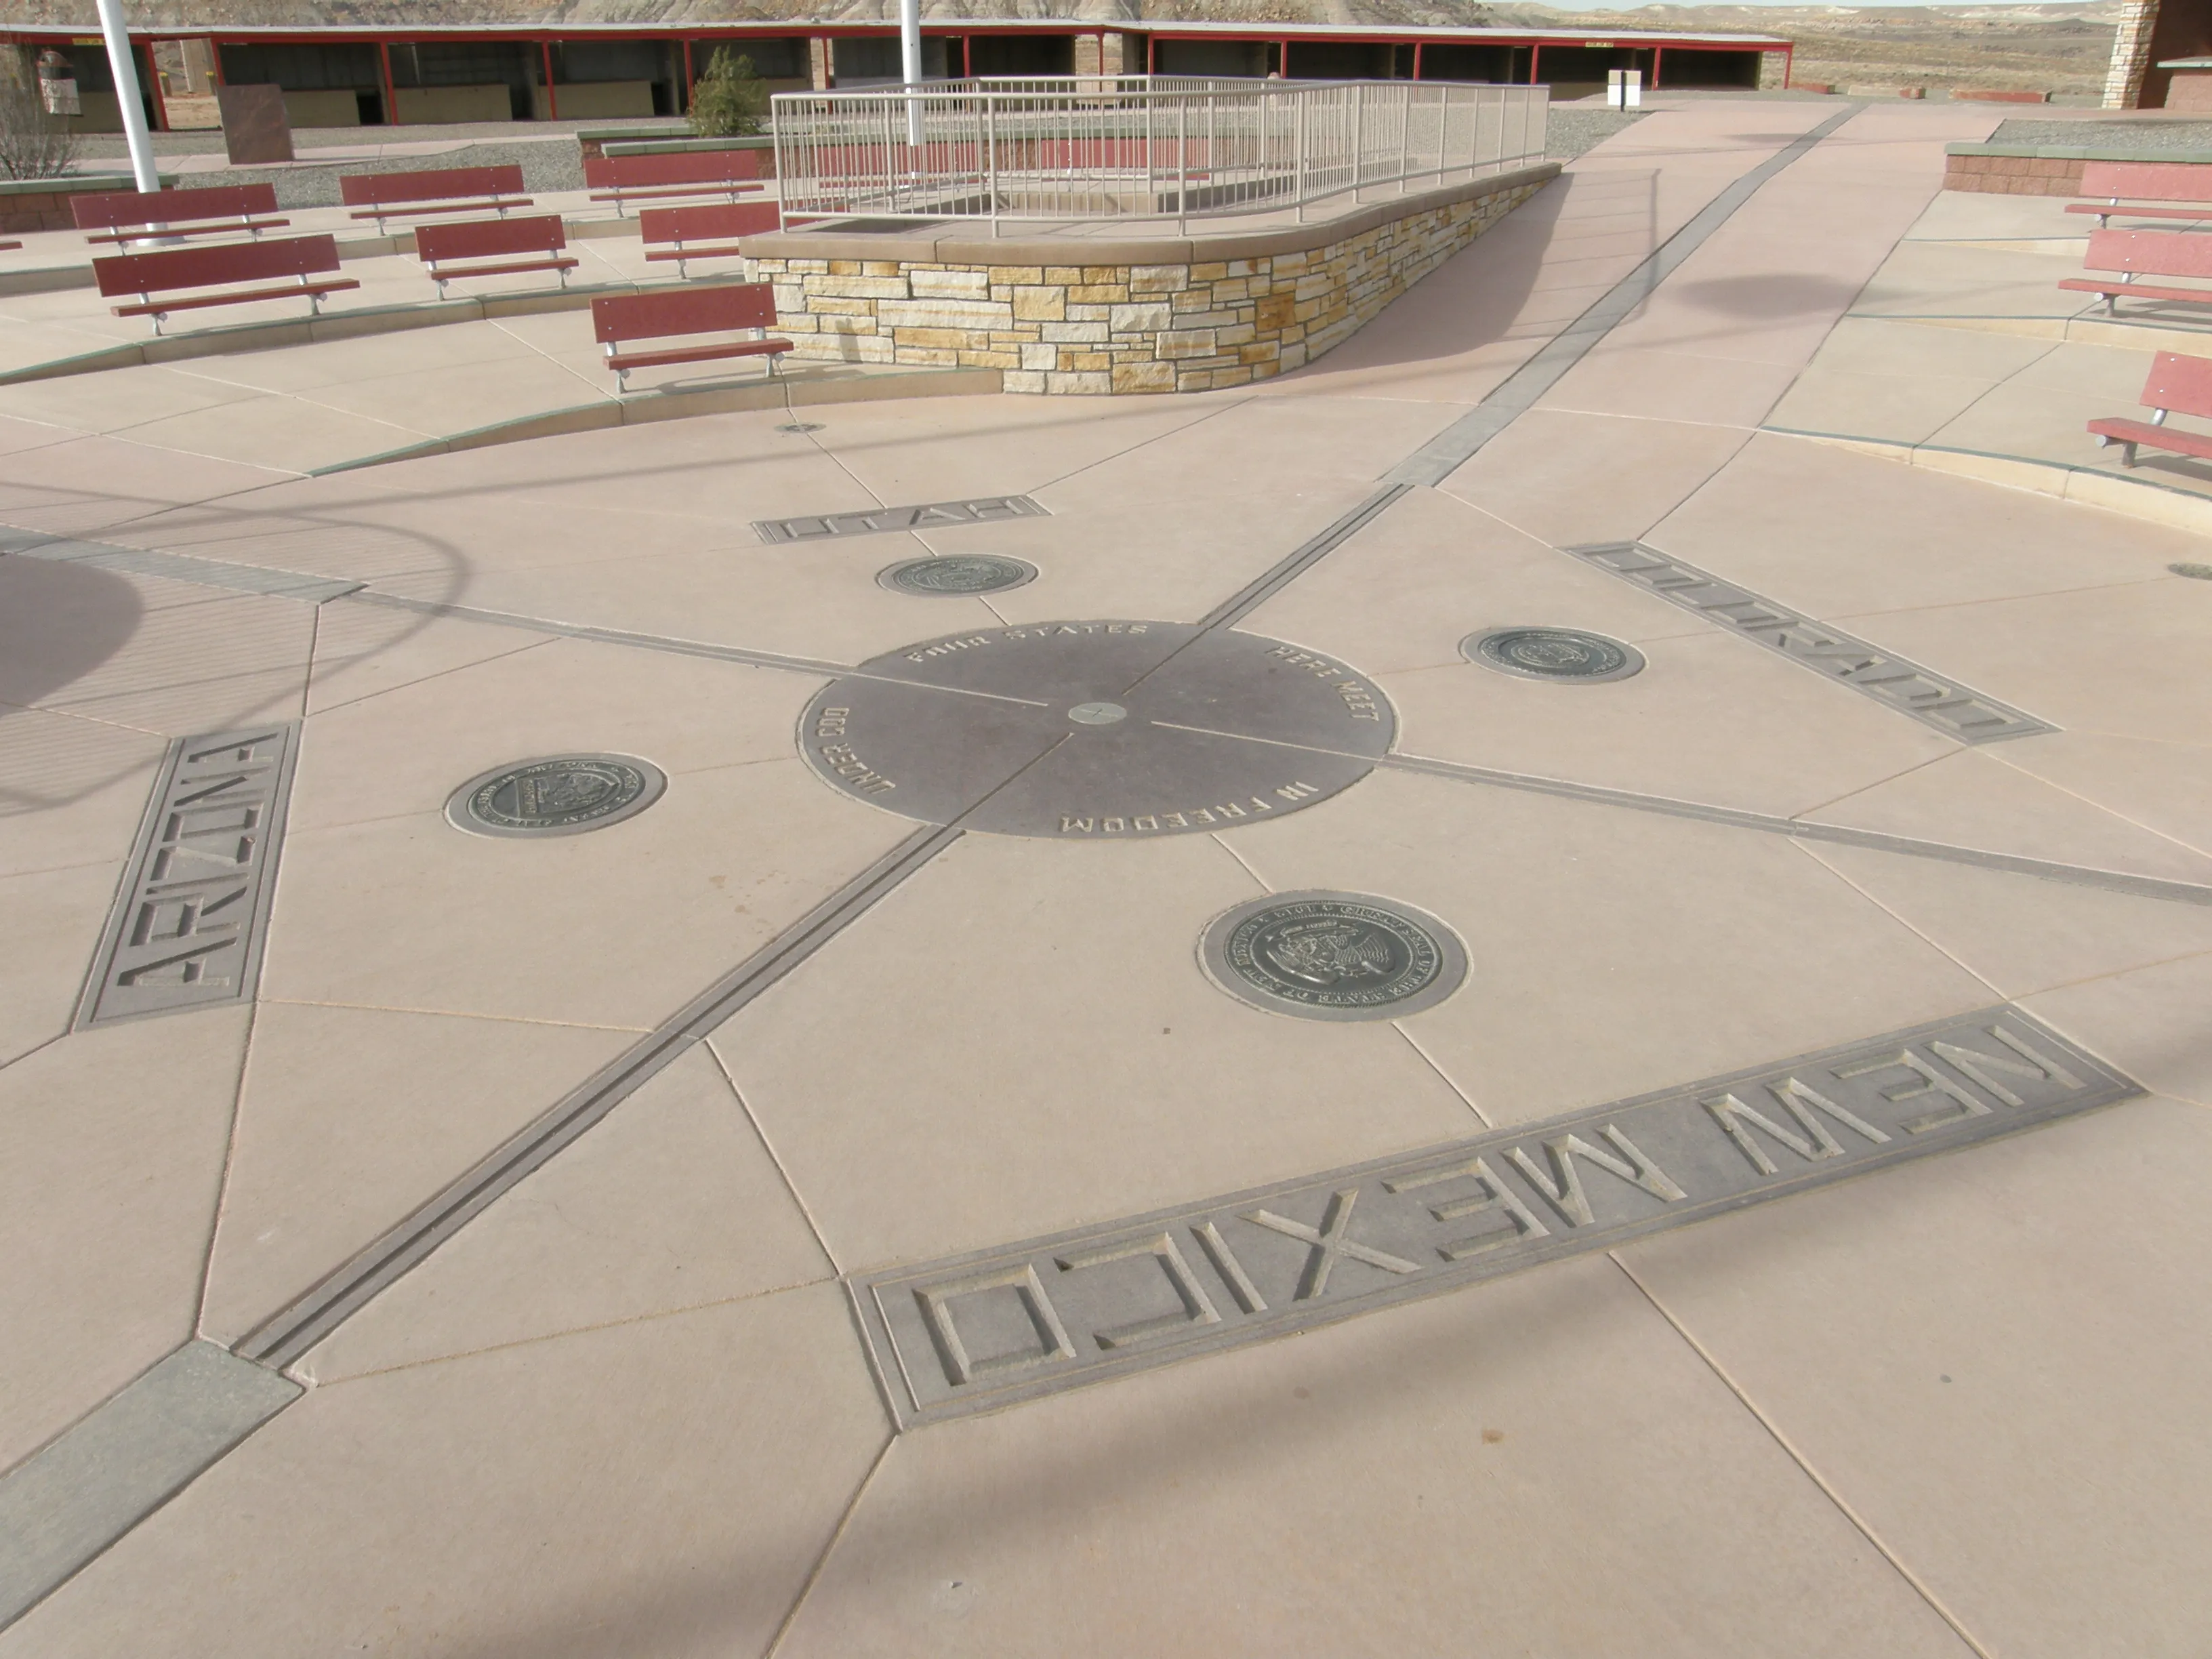 Four Corners Monument in USA, North America | Architecture - Rated 3.4